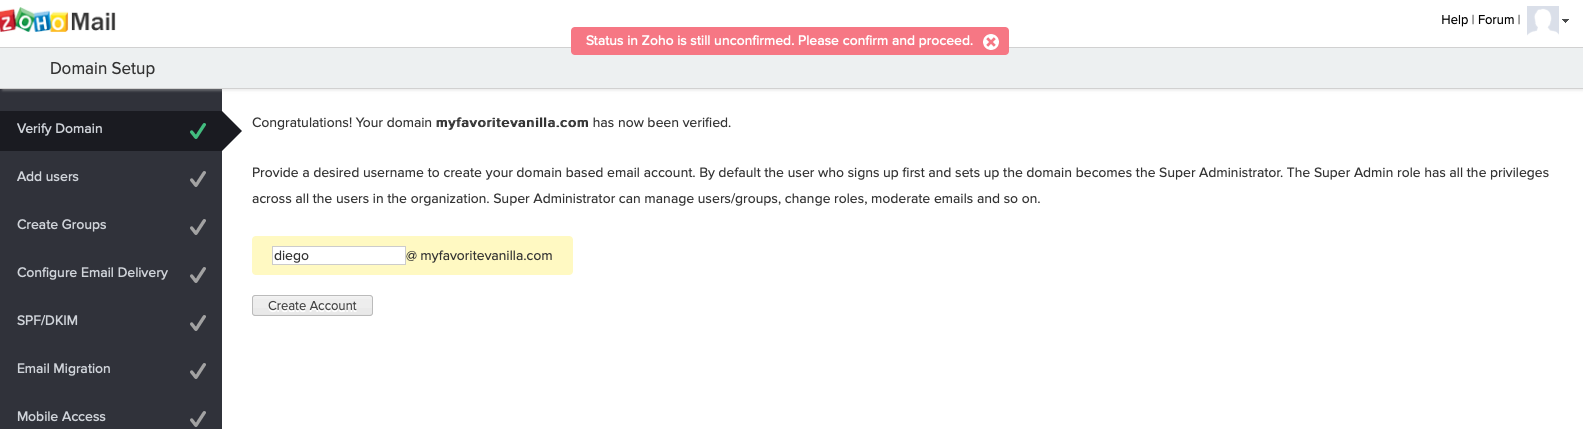 Status In Zoho Is Still Unconfirmed Please Confirm And Proceed